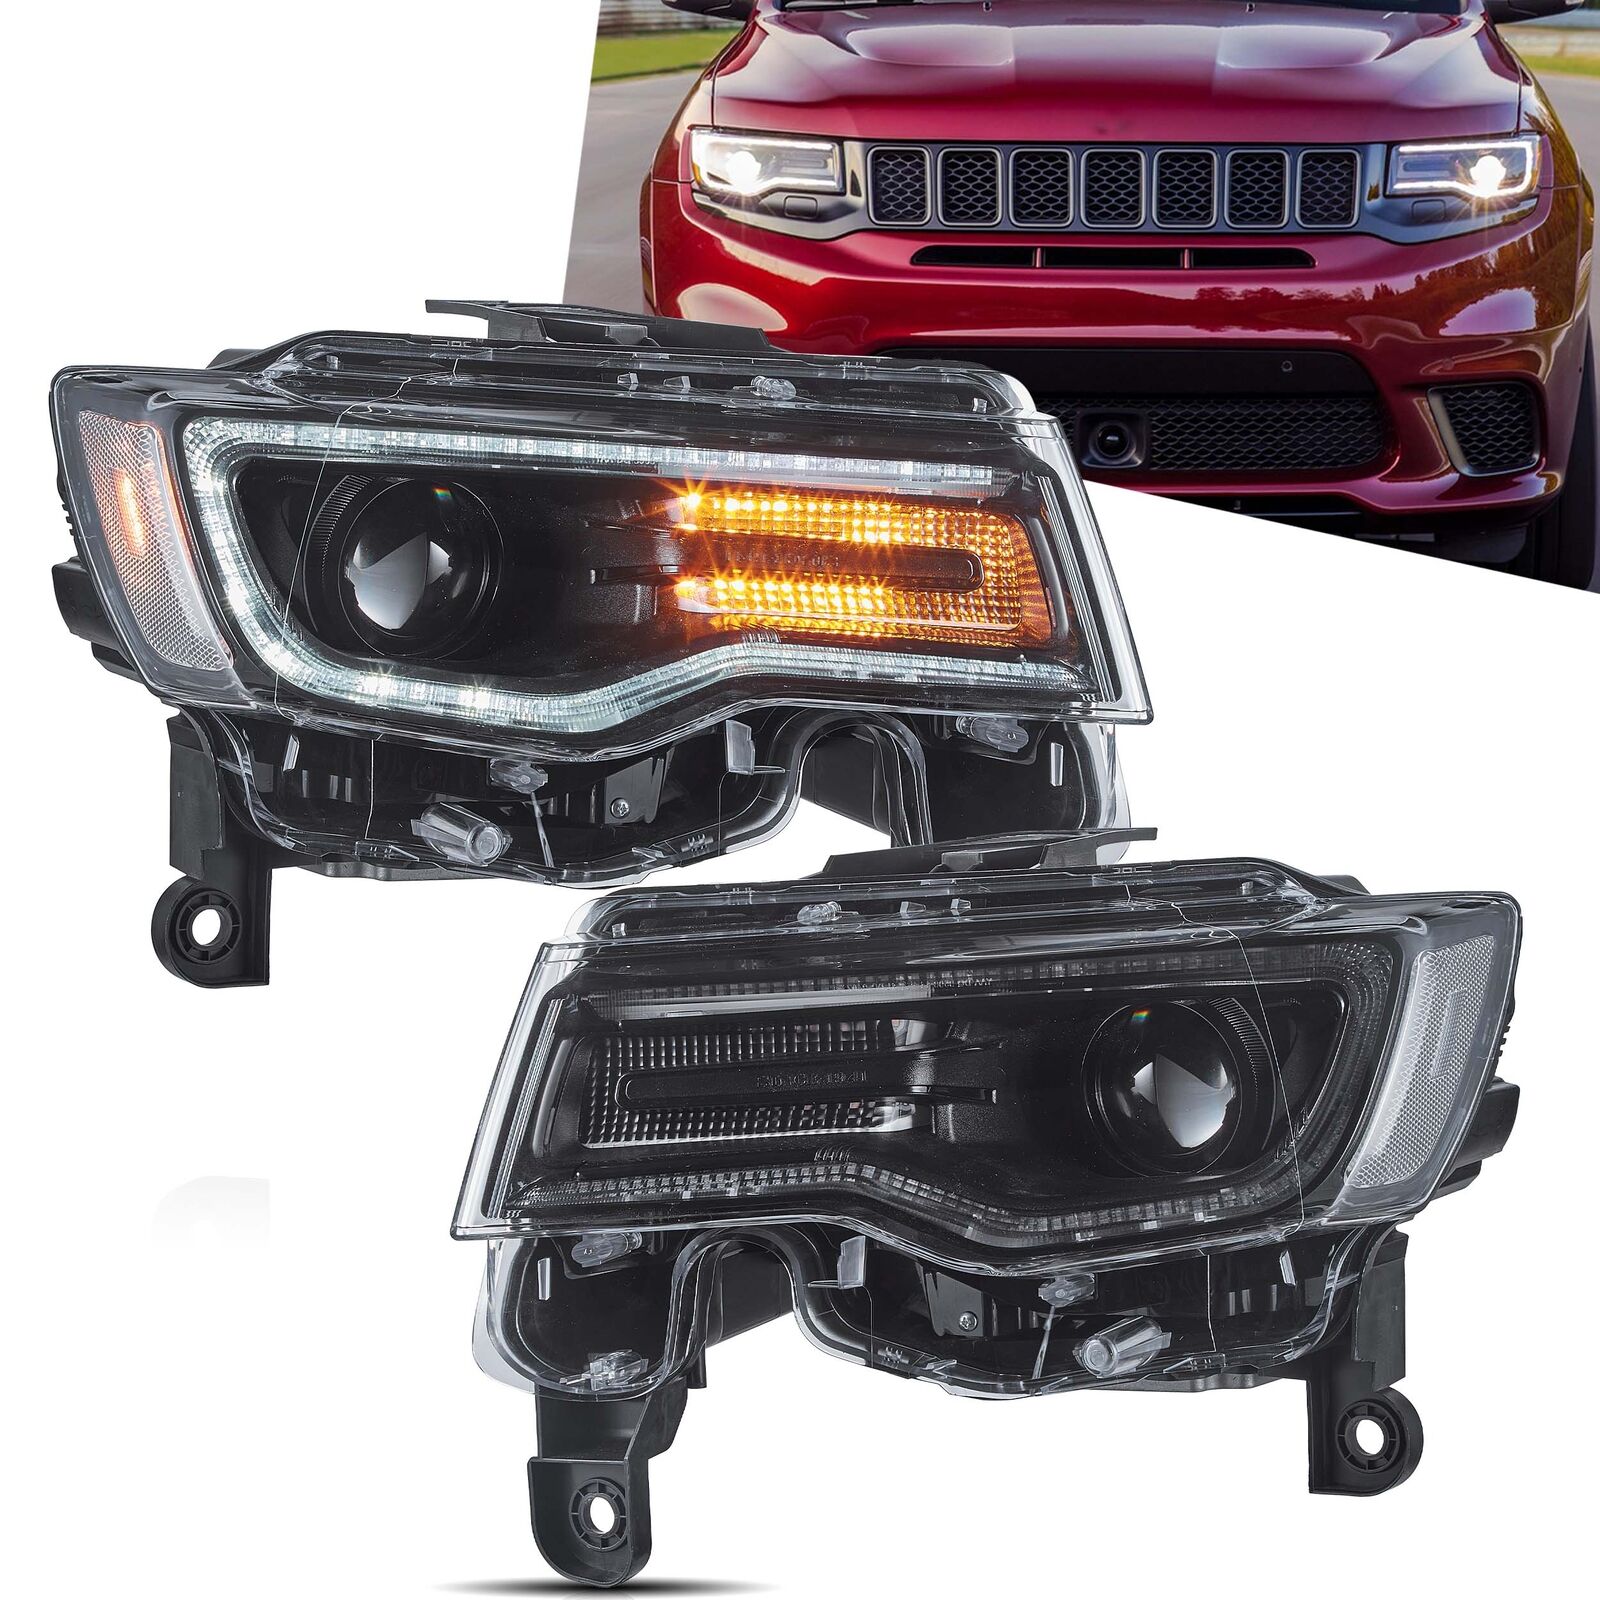 VLAND Full LED Headlights For2014-2022 Jeep Grand Cherokee DRL Startup Animation